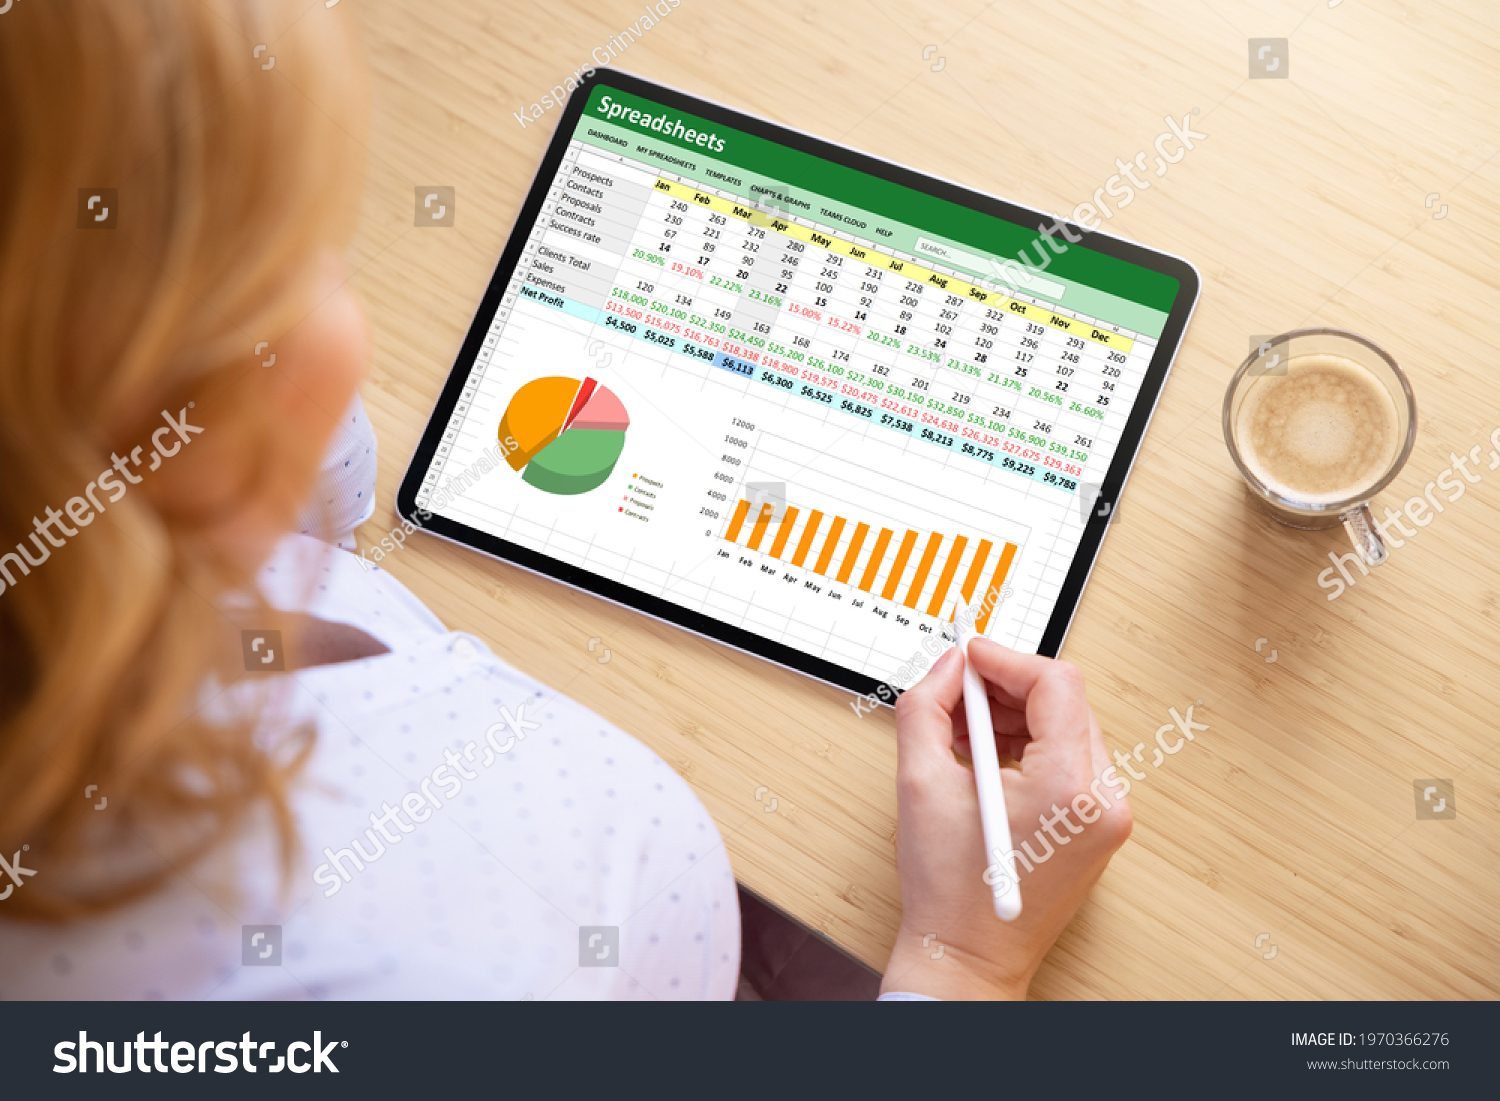 Woman working with spreadsheet document on tablet computer #1970366276